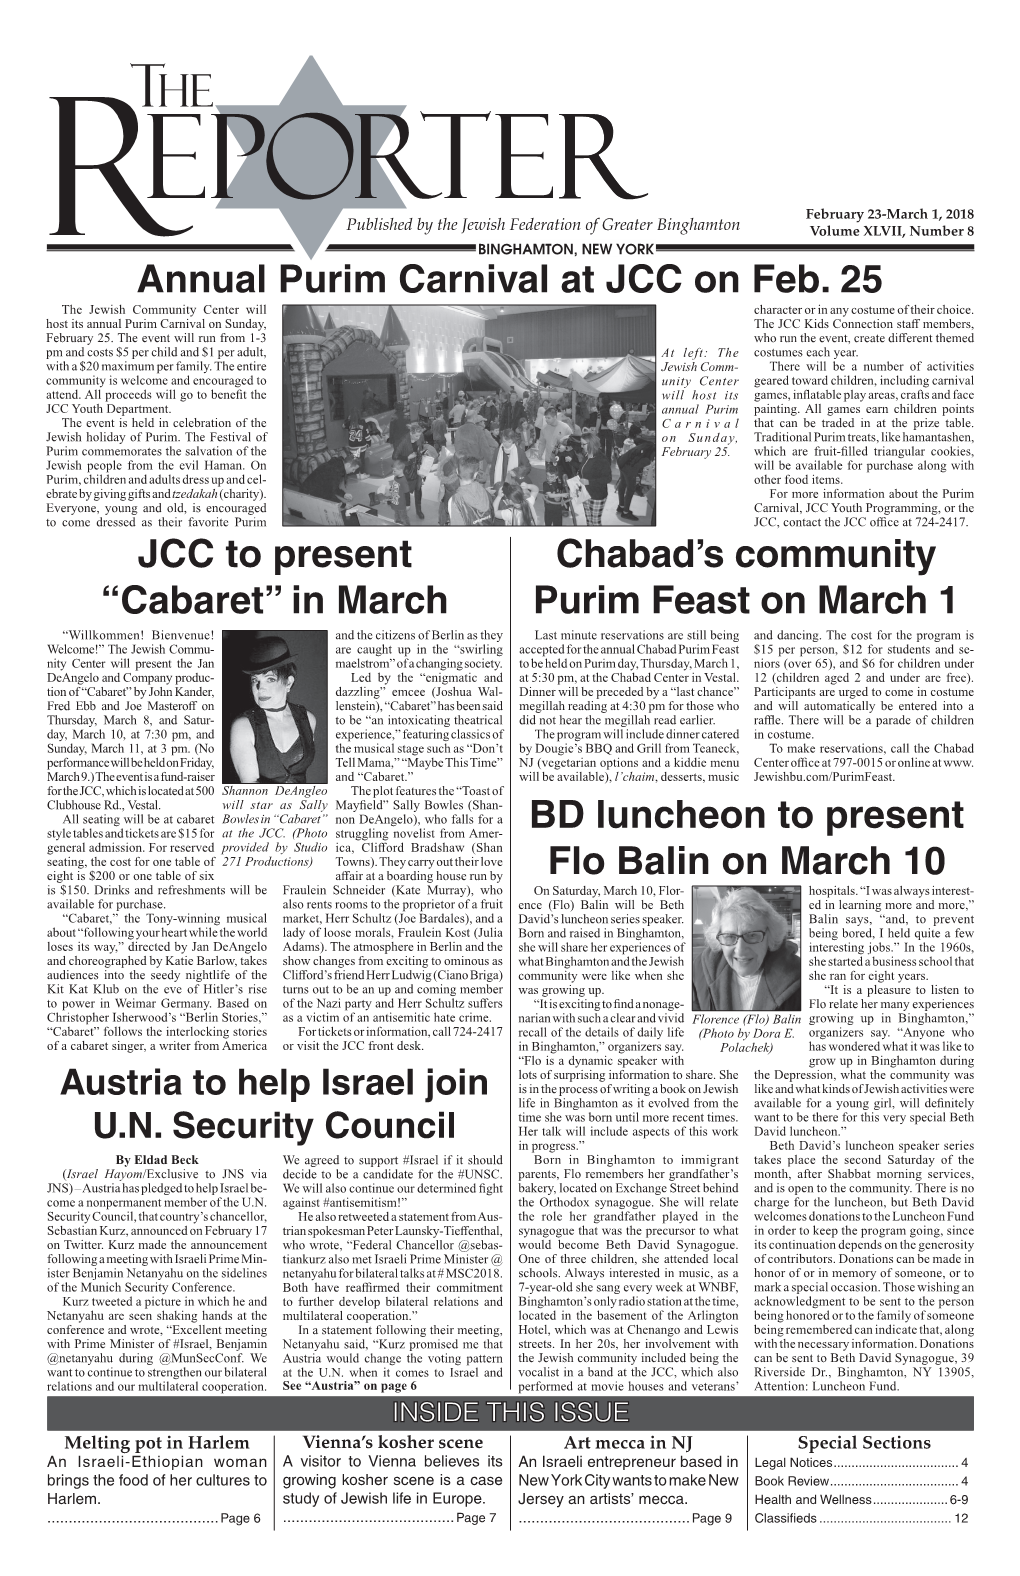 Chabad's Community Purim Feast on March 1 Annual Purim Carnival at JCC on Feb. 25 BD Luncheon to Present Flo Balin on March 10